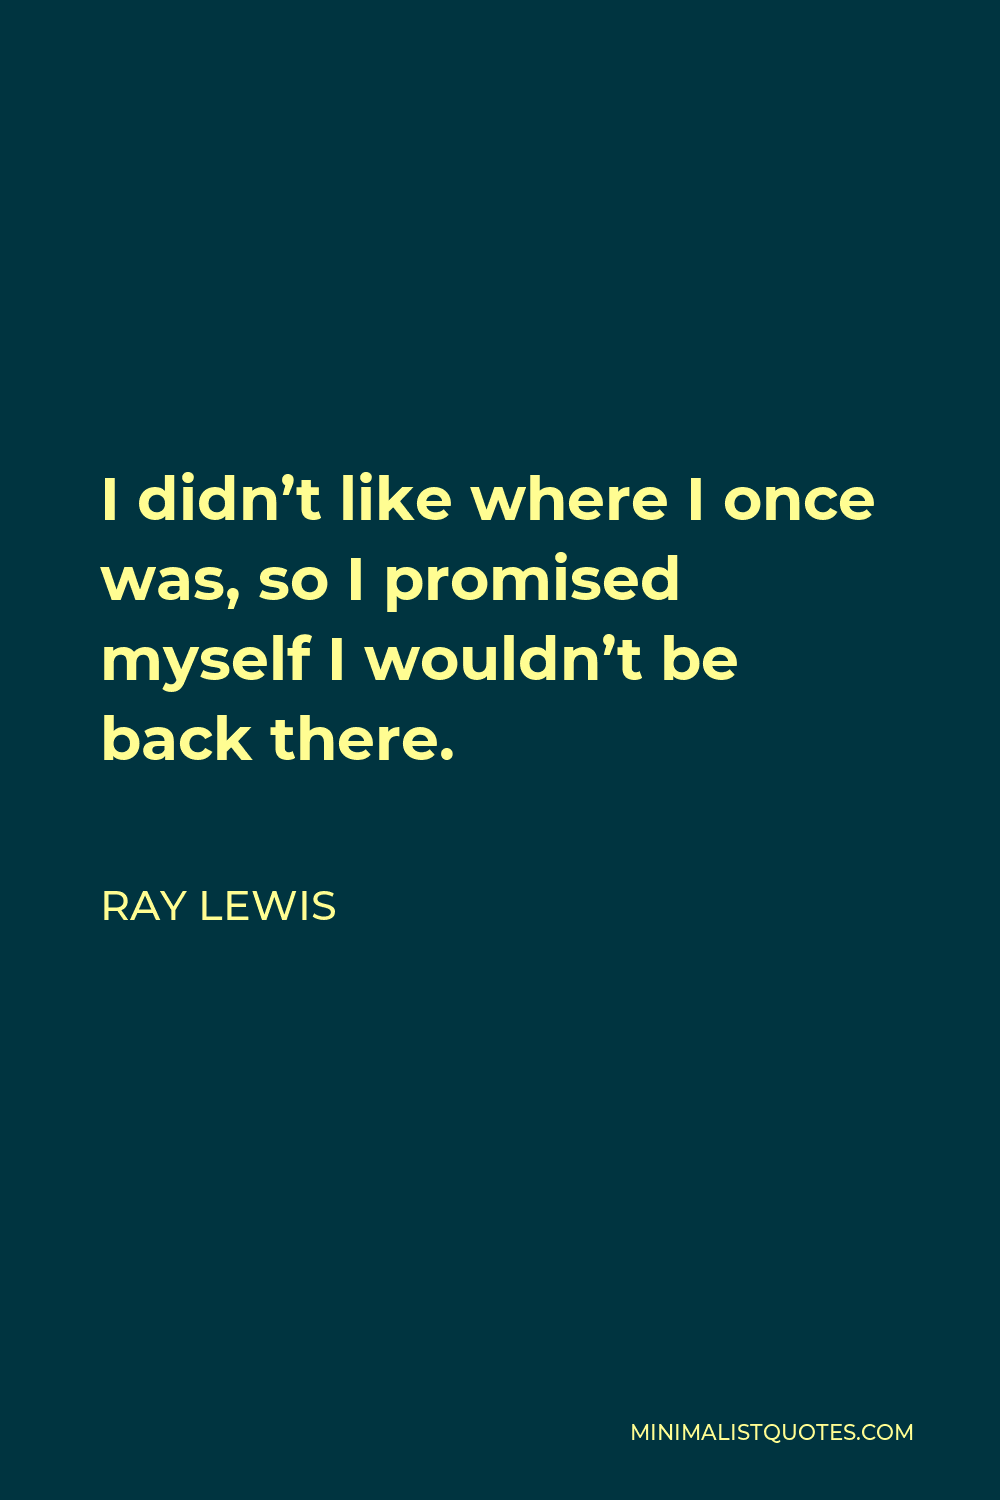 Ray Lewis Quote - I didn’t like where I once was, so I promised myself I wouldn’t be back there.